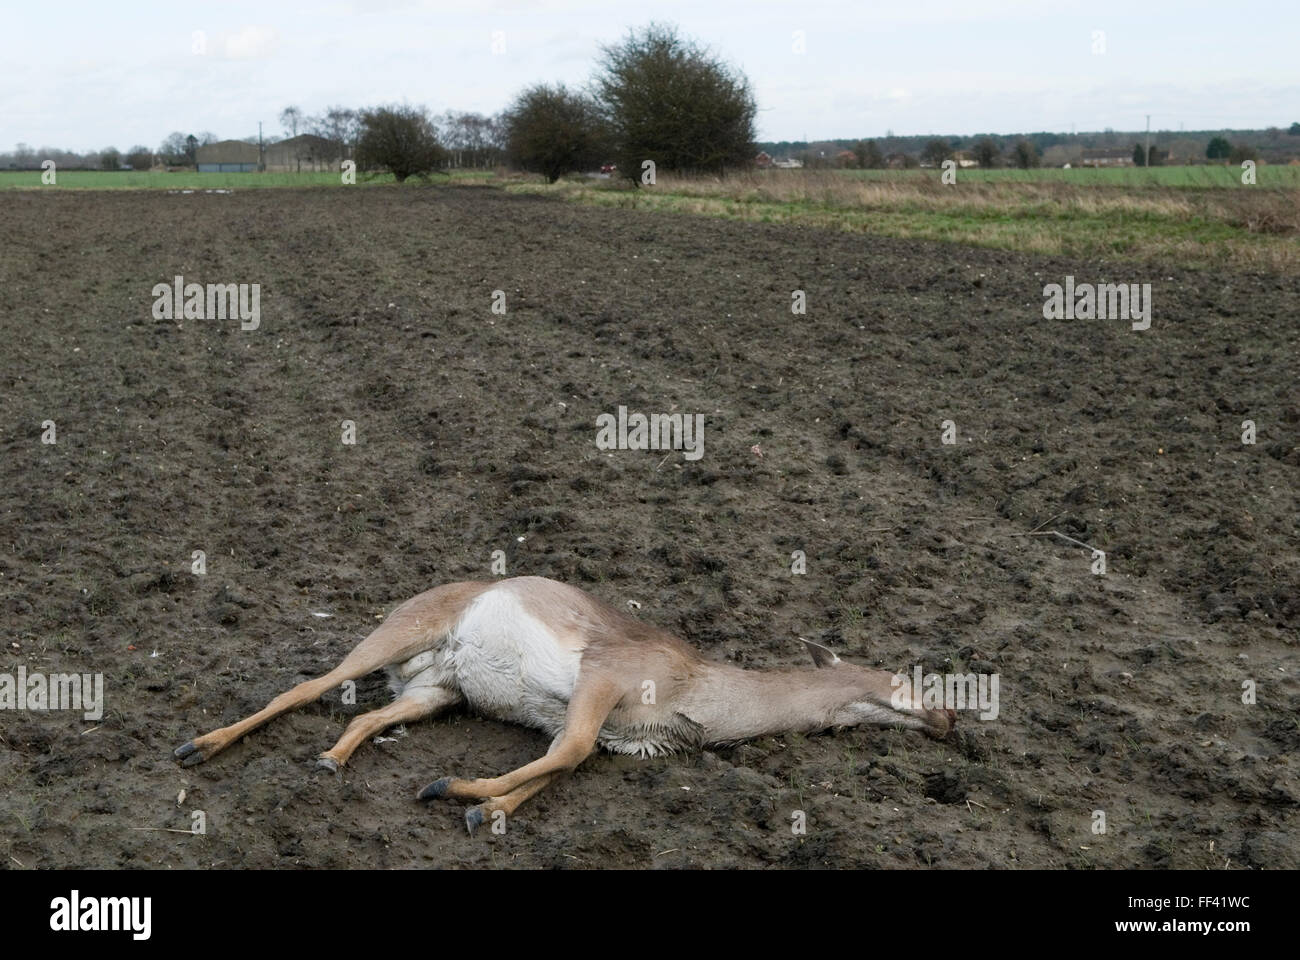 Roe Deer dead countryside Oxfordshire, probably killed, hit by a passing car and then staggered into this nearby field and died.  UK 2016 HOMER SYKES Stock Photo